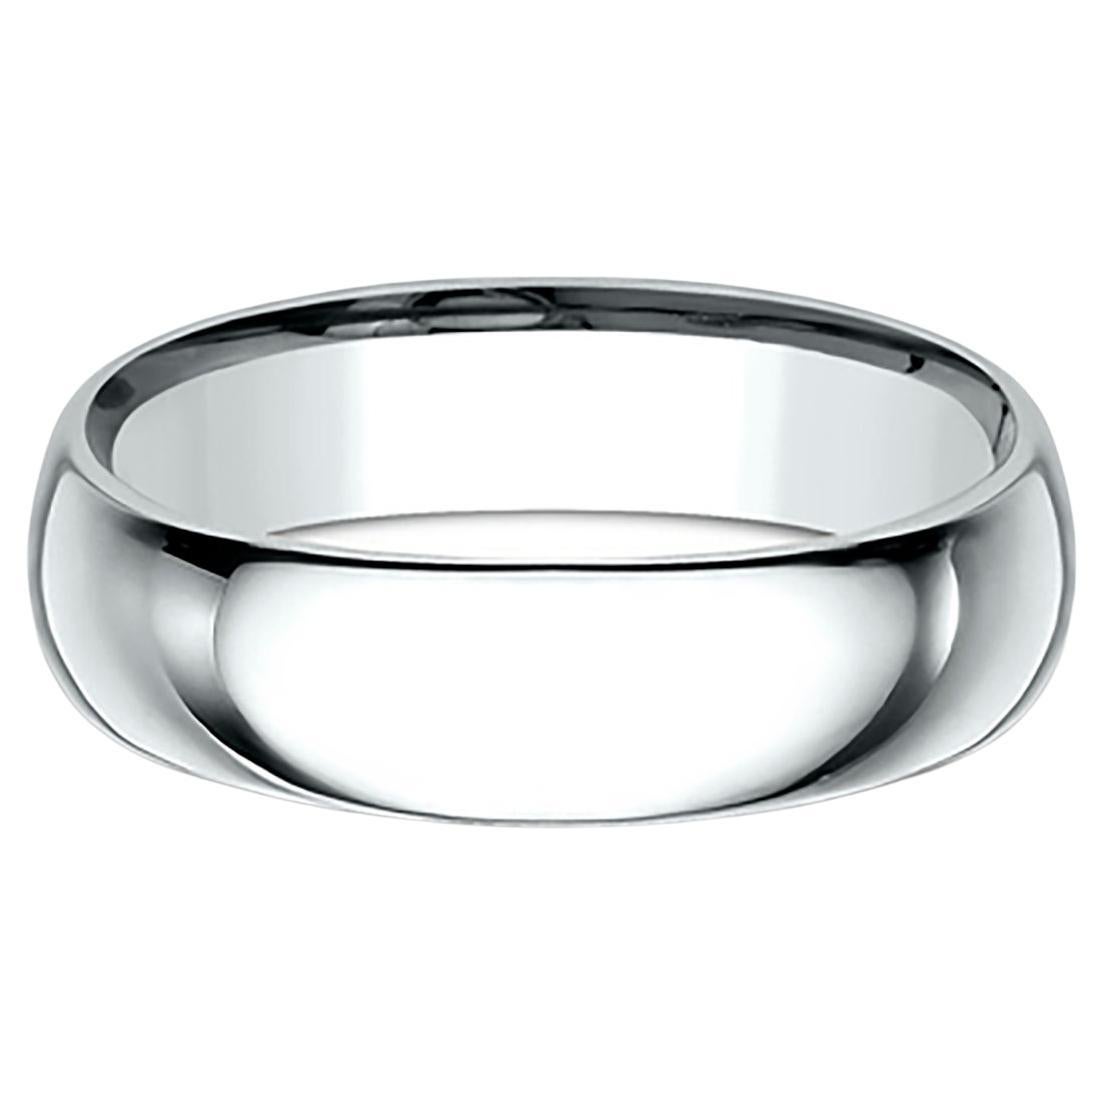 Benchmark Classic Comfort Fit Wedding Band in Platinum, Width 6mm